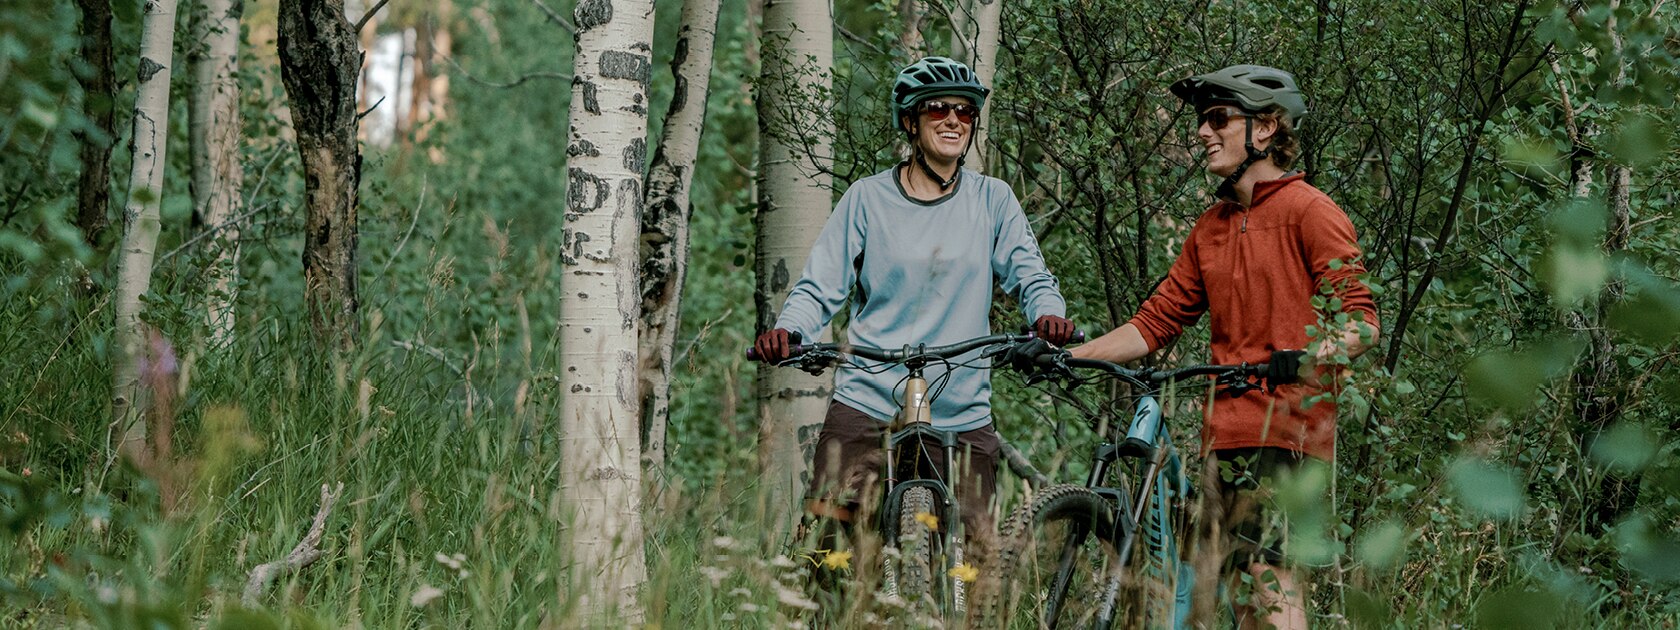 two people resting on their mountain bike wearing polarized sunglasses on a lush forested trail